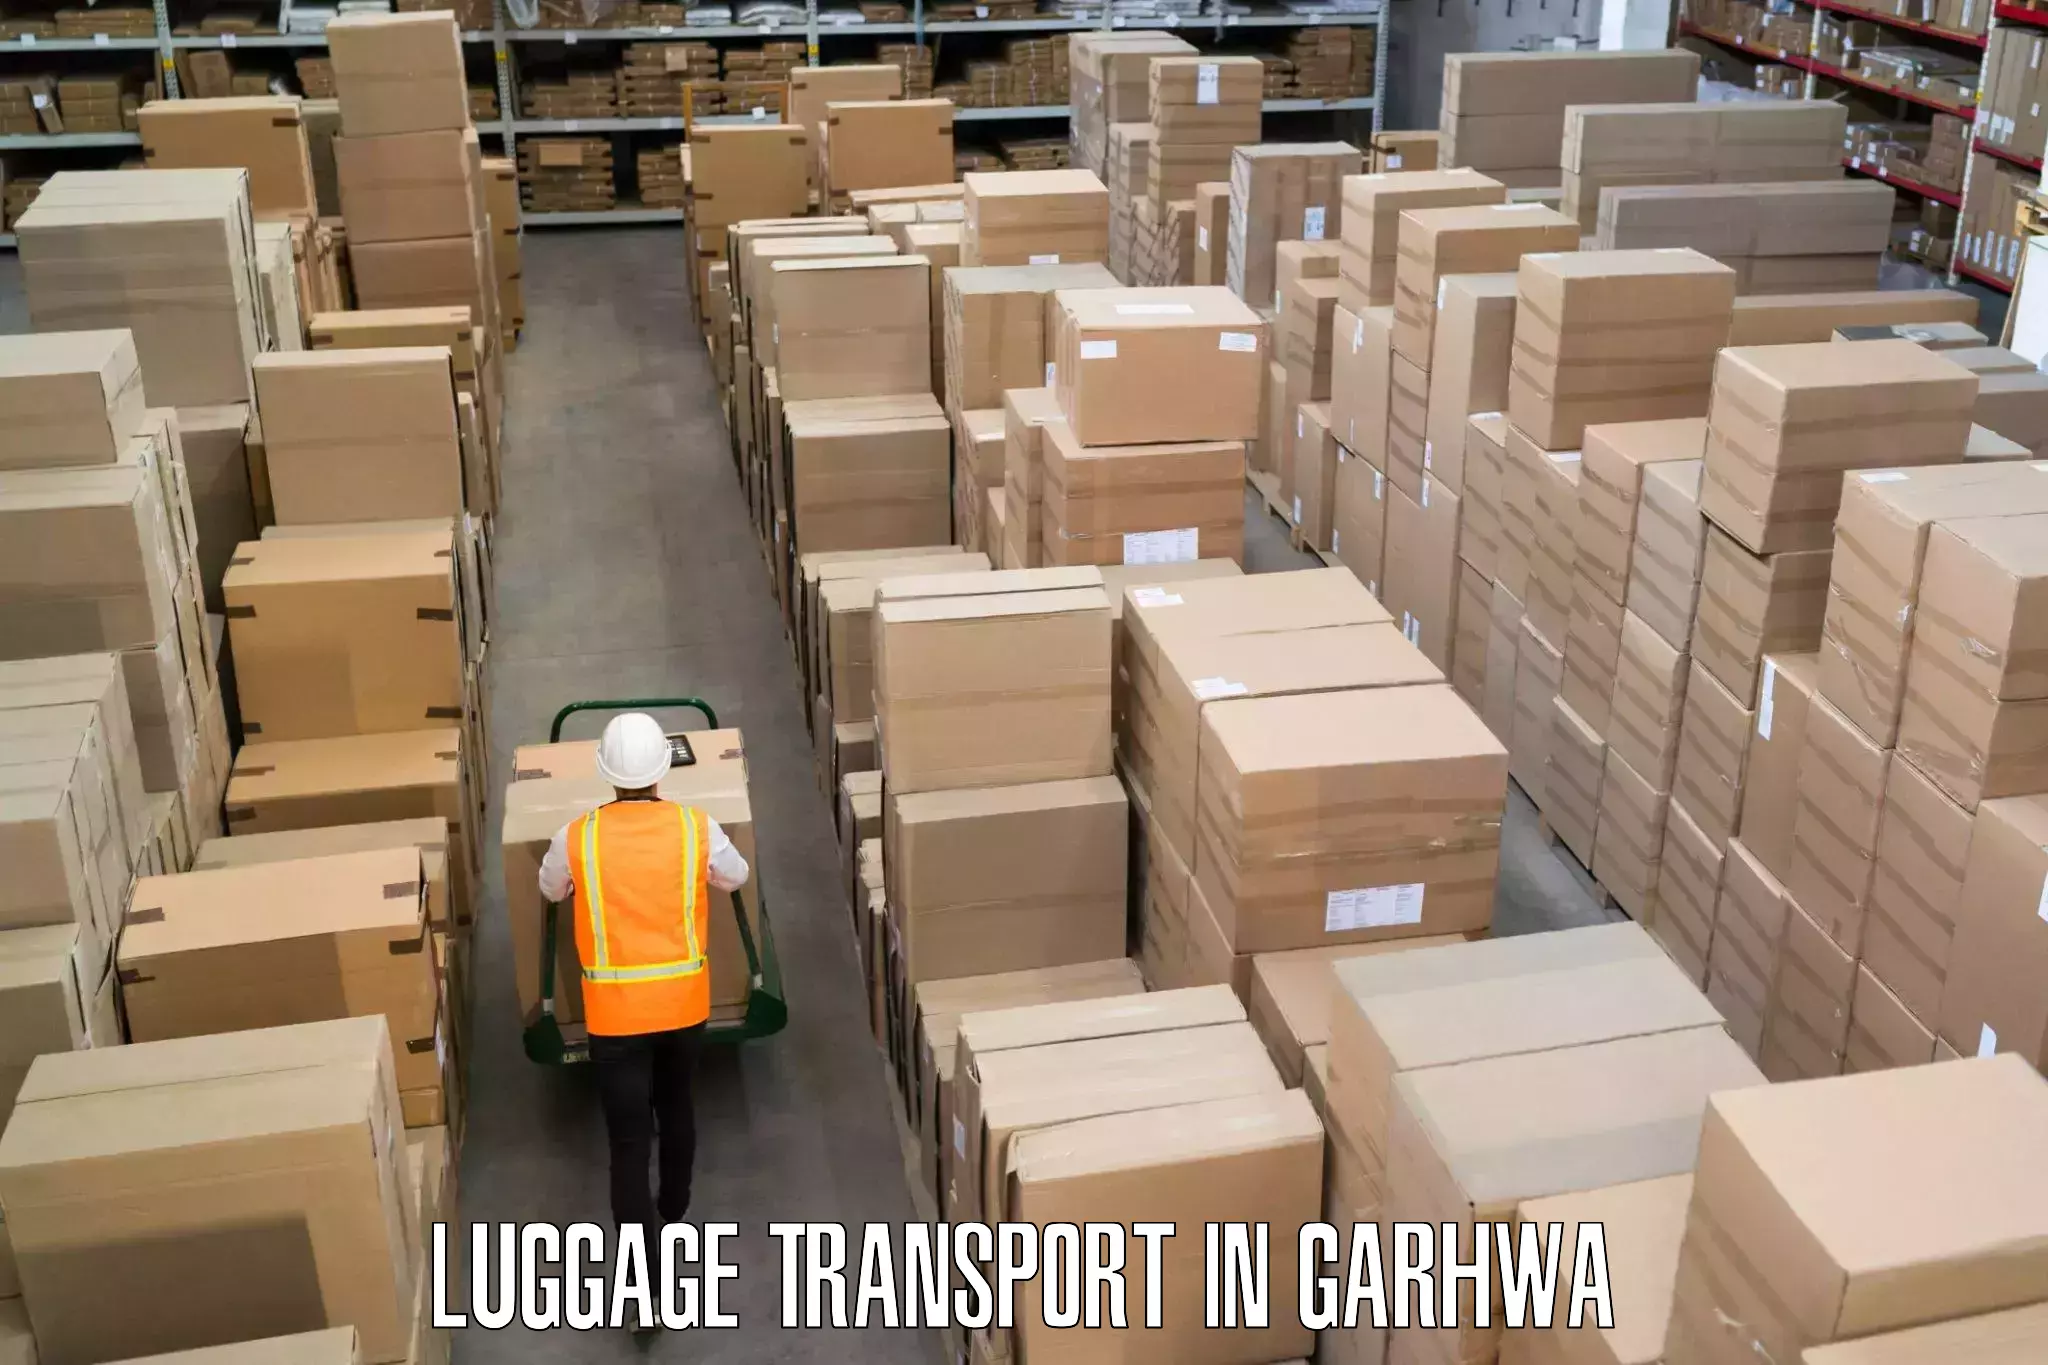 Luggage delivery operations in Garhwa